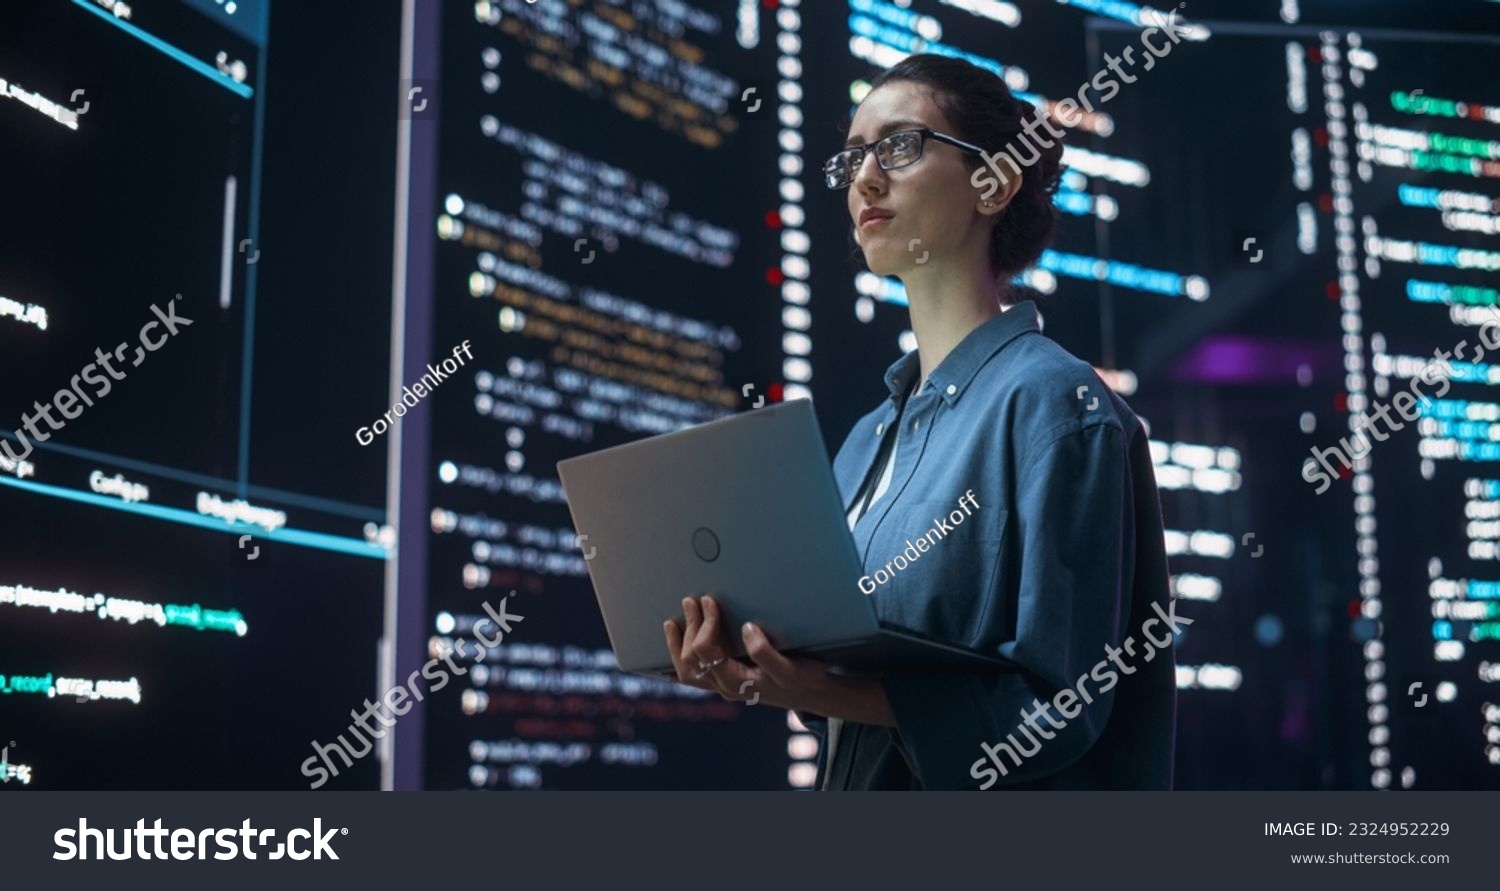 Portrait of Woman Creating a Software and Coding, Surrounded by Big Screens Displaying Lines of Programming Language Code. Female Programmer Working in a Monitoring Room. Futuristic Concept #2324952229